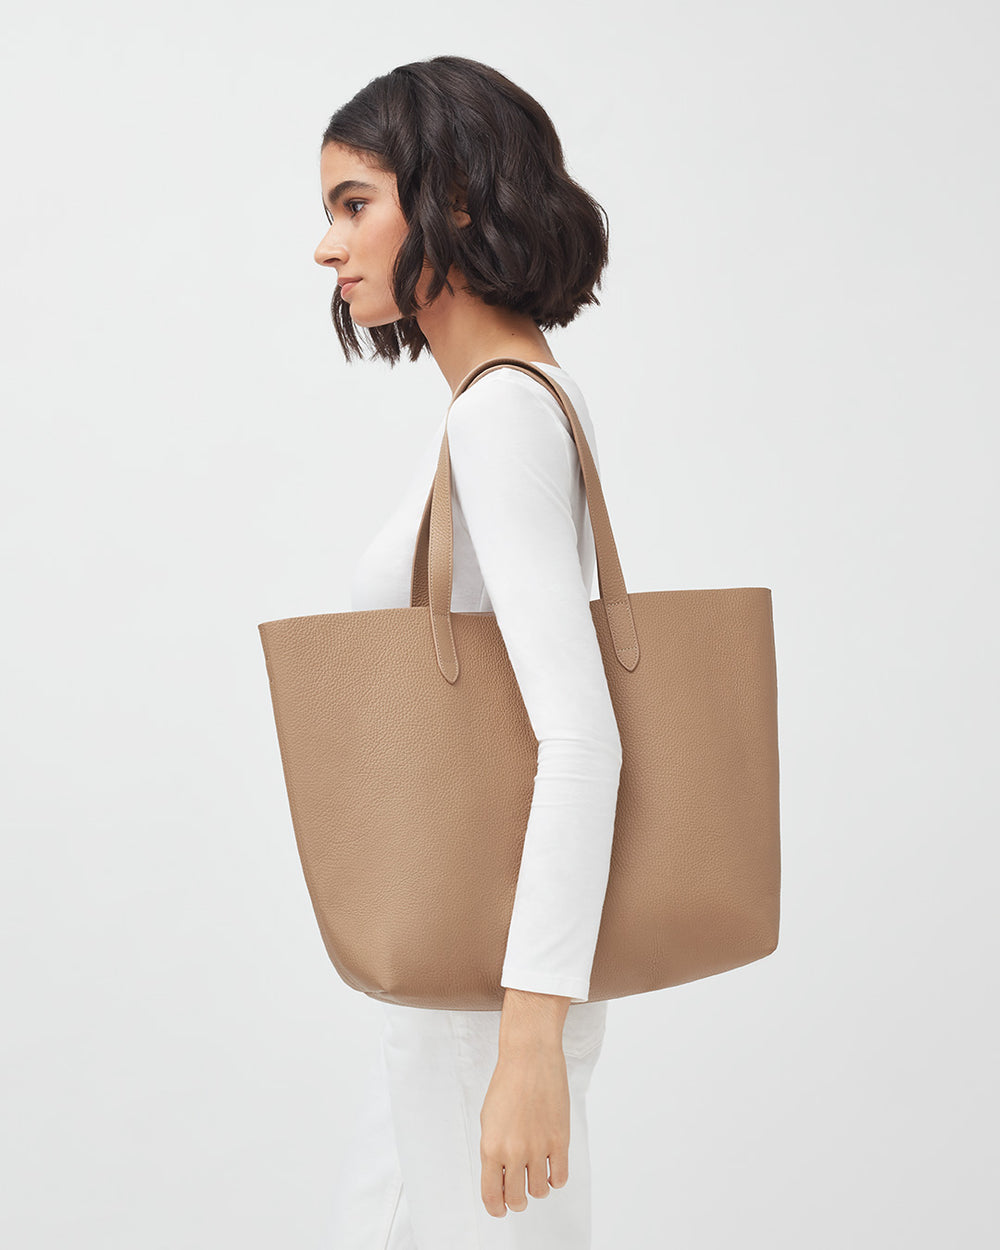 Woman in profile carrying a large tote bag